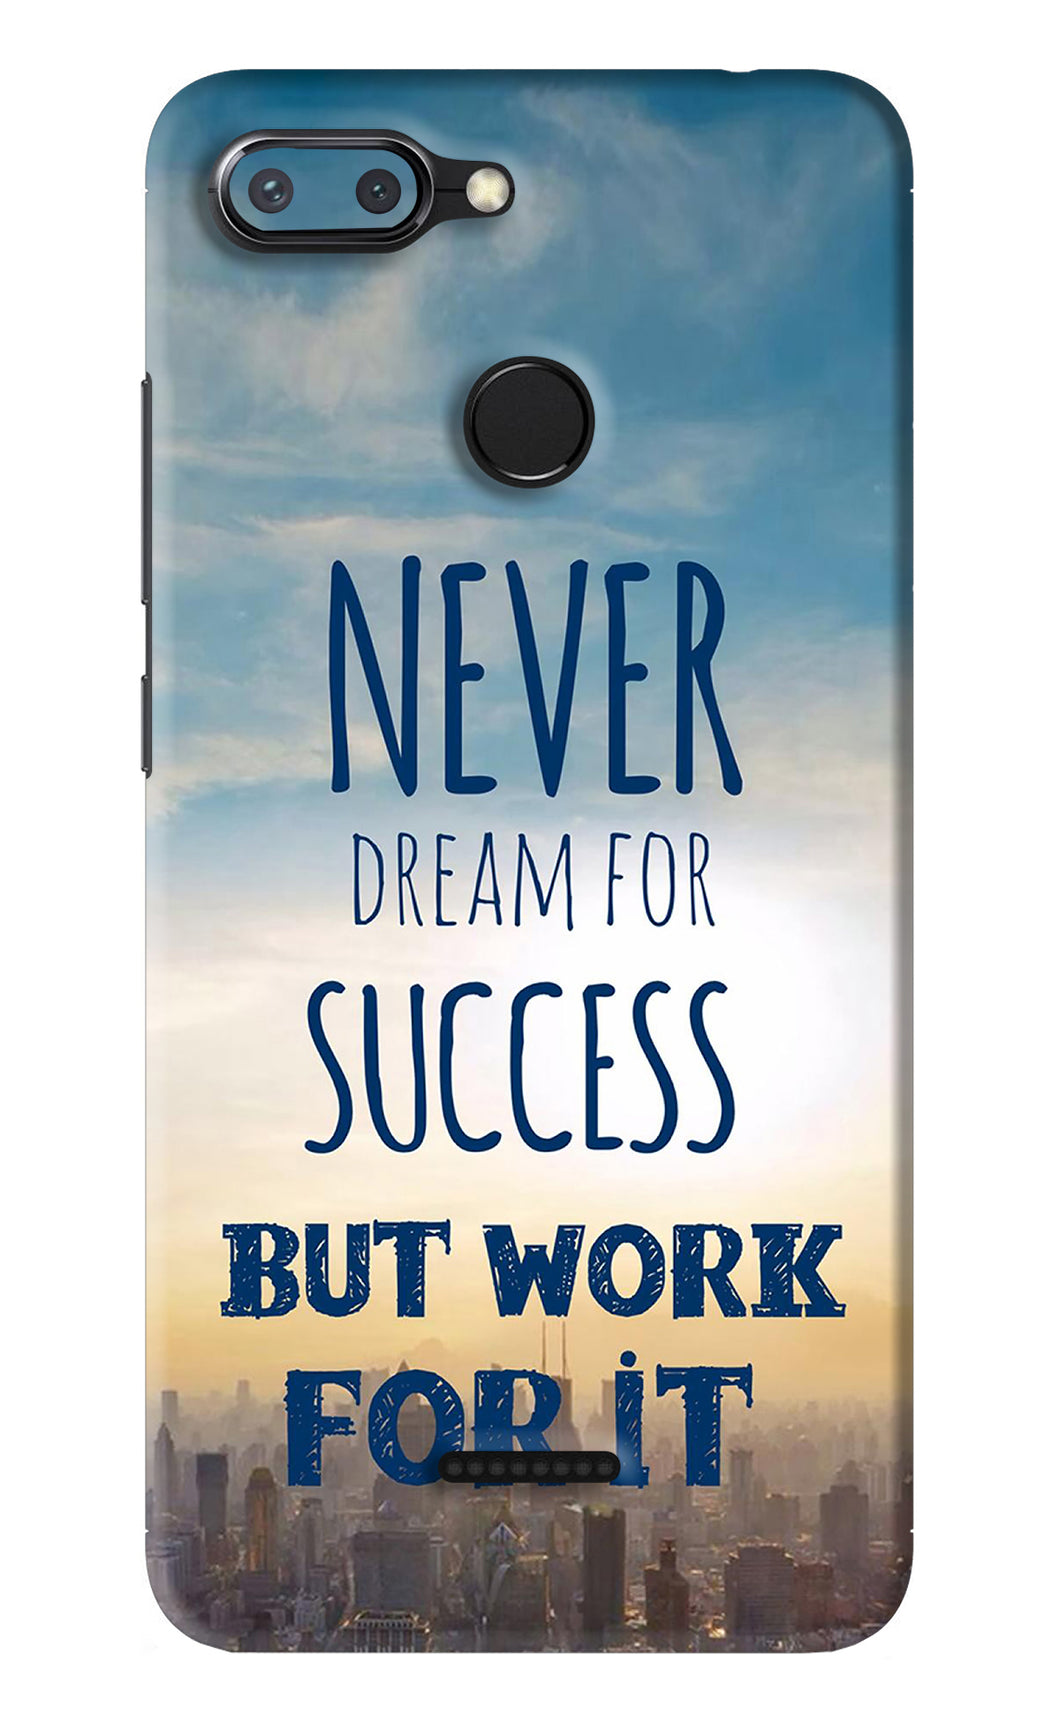 Never Dream For Success But Work For It Xiaomi Redmi 6 Back Skin Wrap